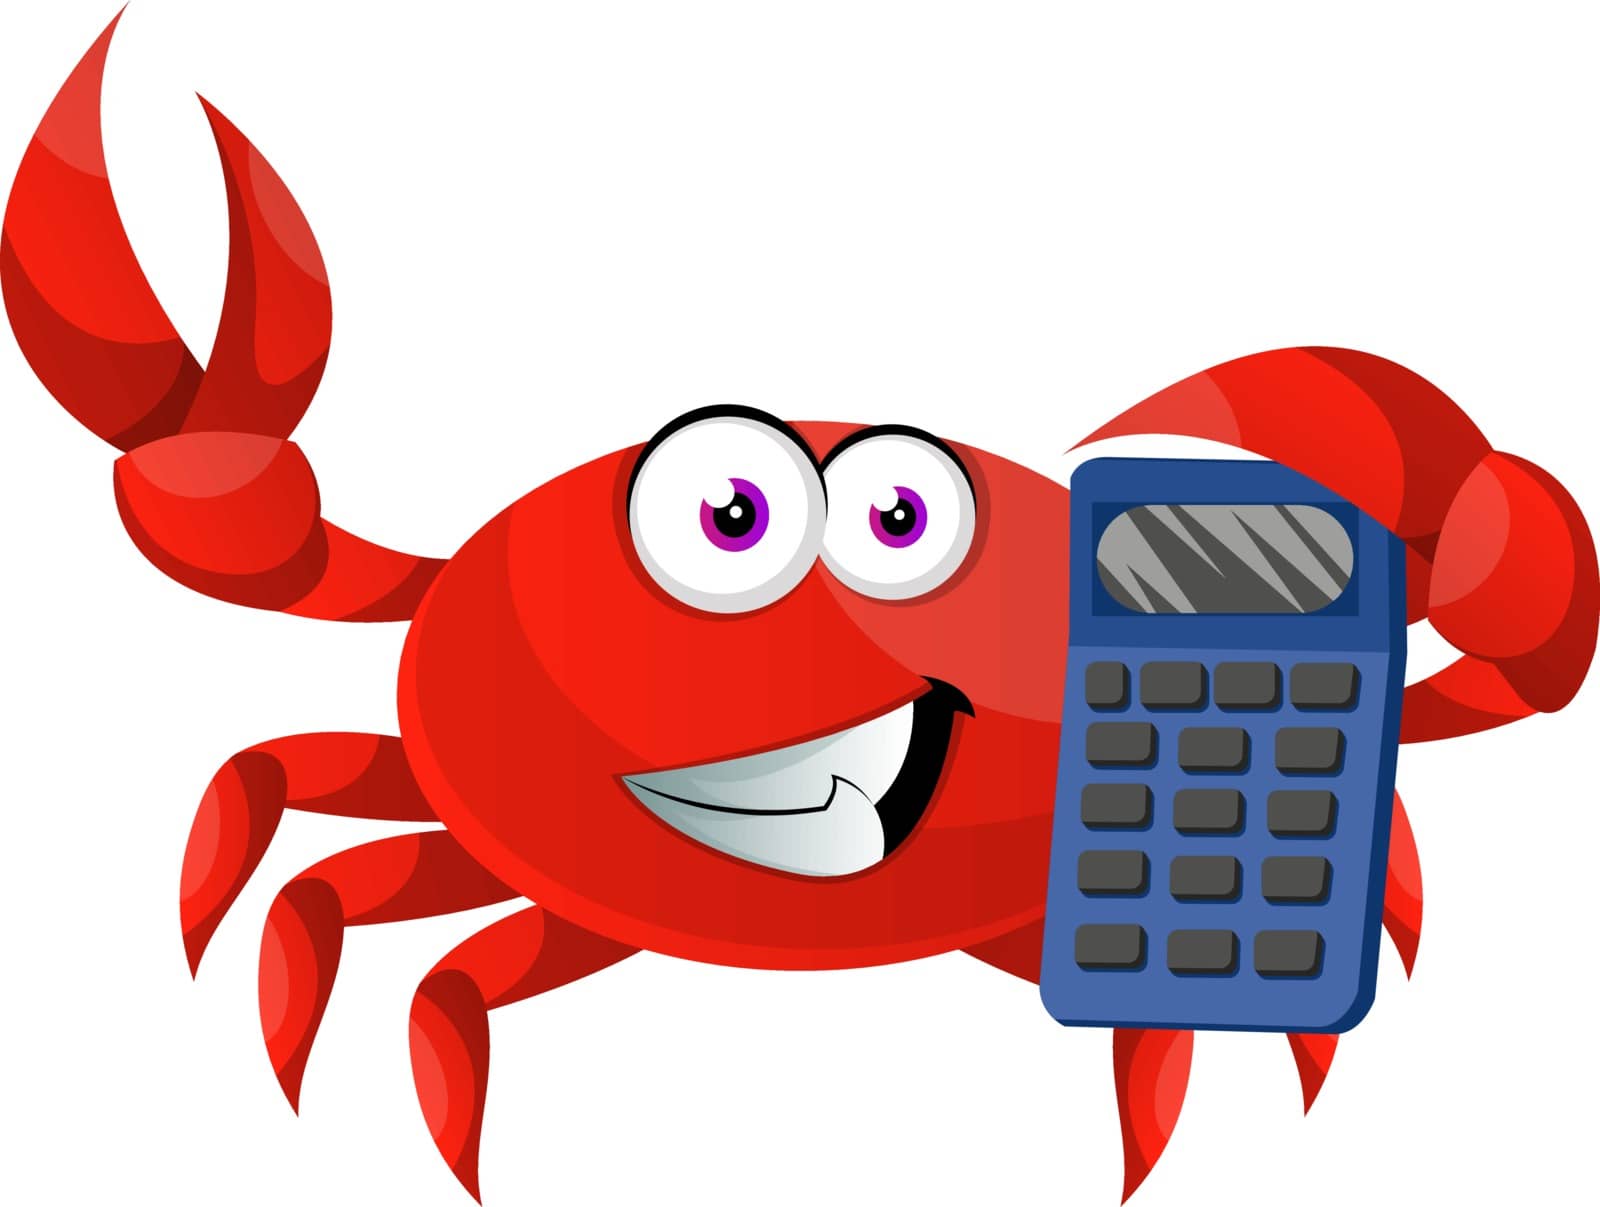 Crab with calculator, illustration, vector on white background.